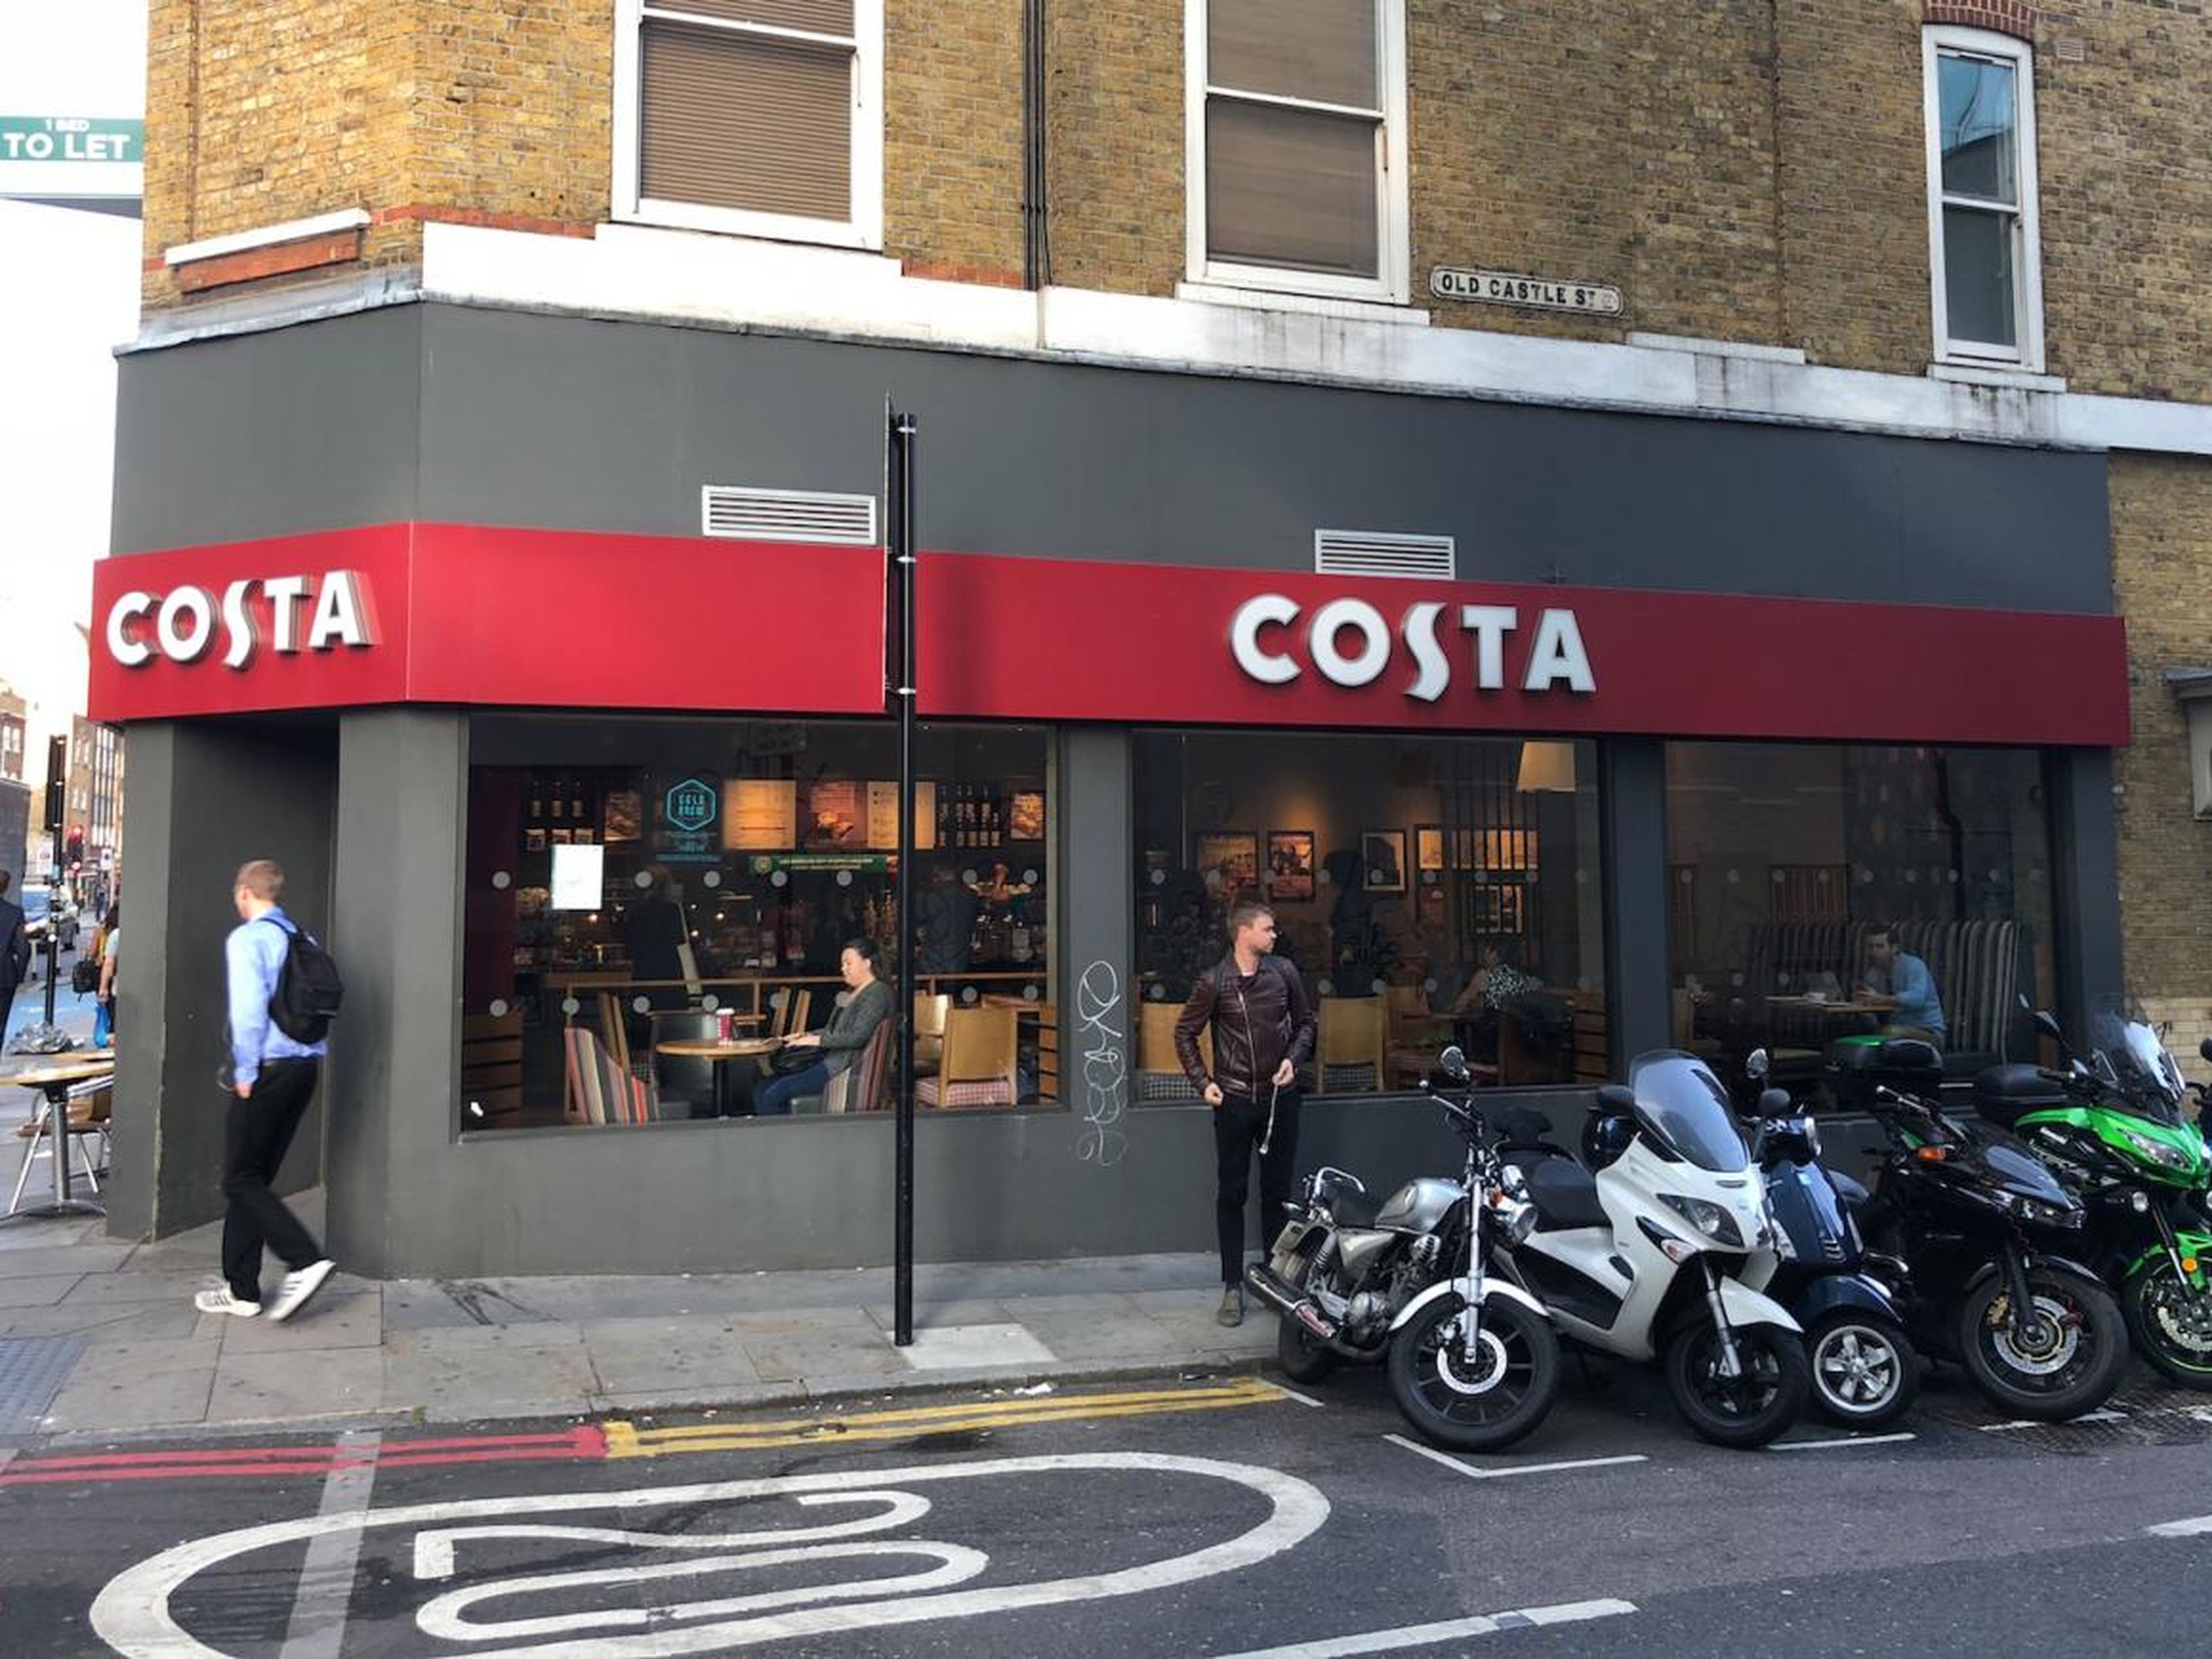 I went to the Costa Coffee on Whitechapel High Street in East London, near Business Insider's UK headquarters. The area boasts a plethora of chain coffee shops such as Pret a Manger, Caffe Nero, and Starbucks, as well as a